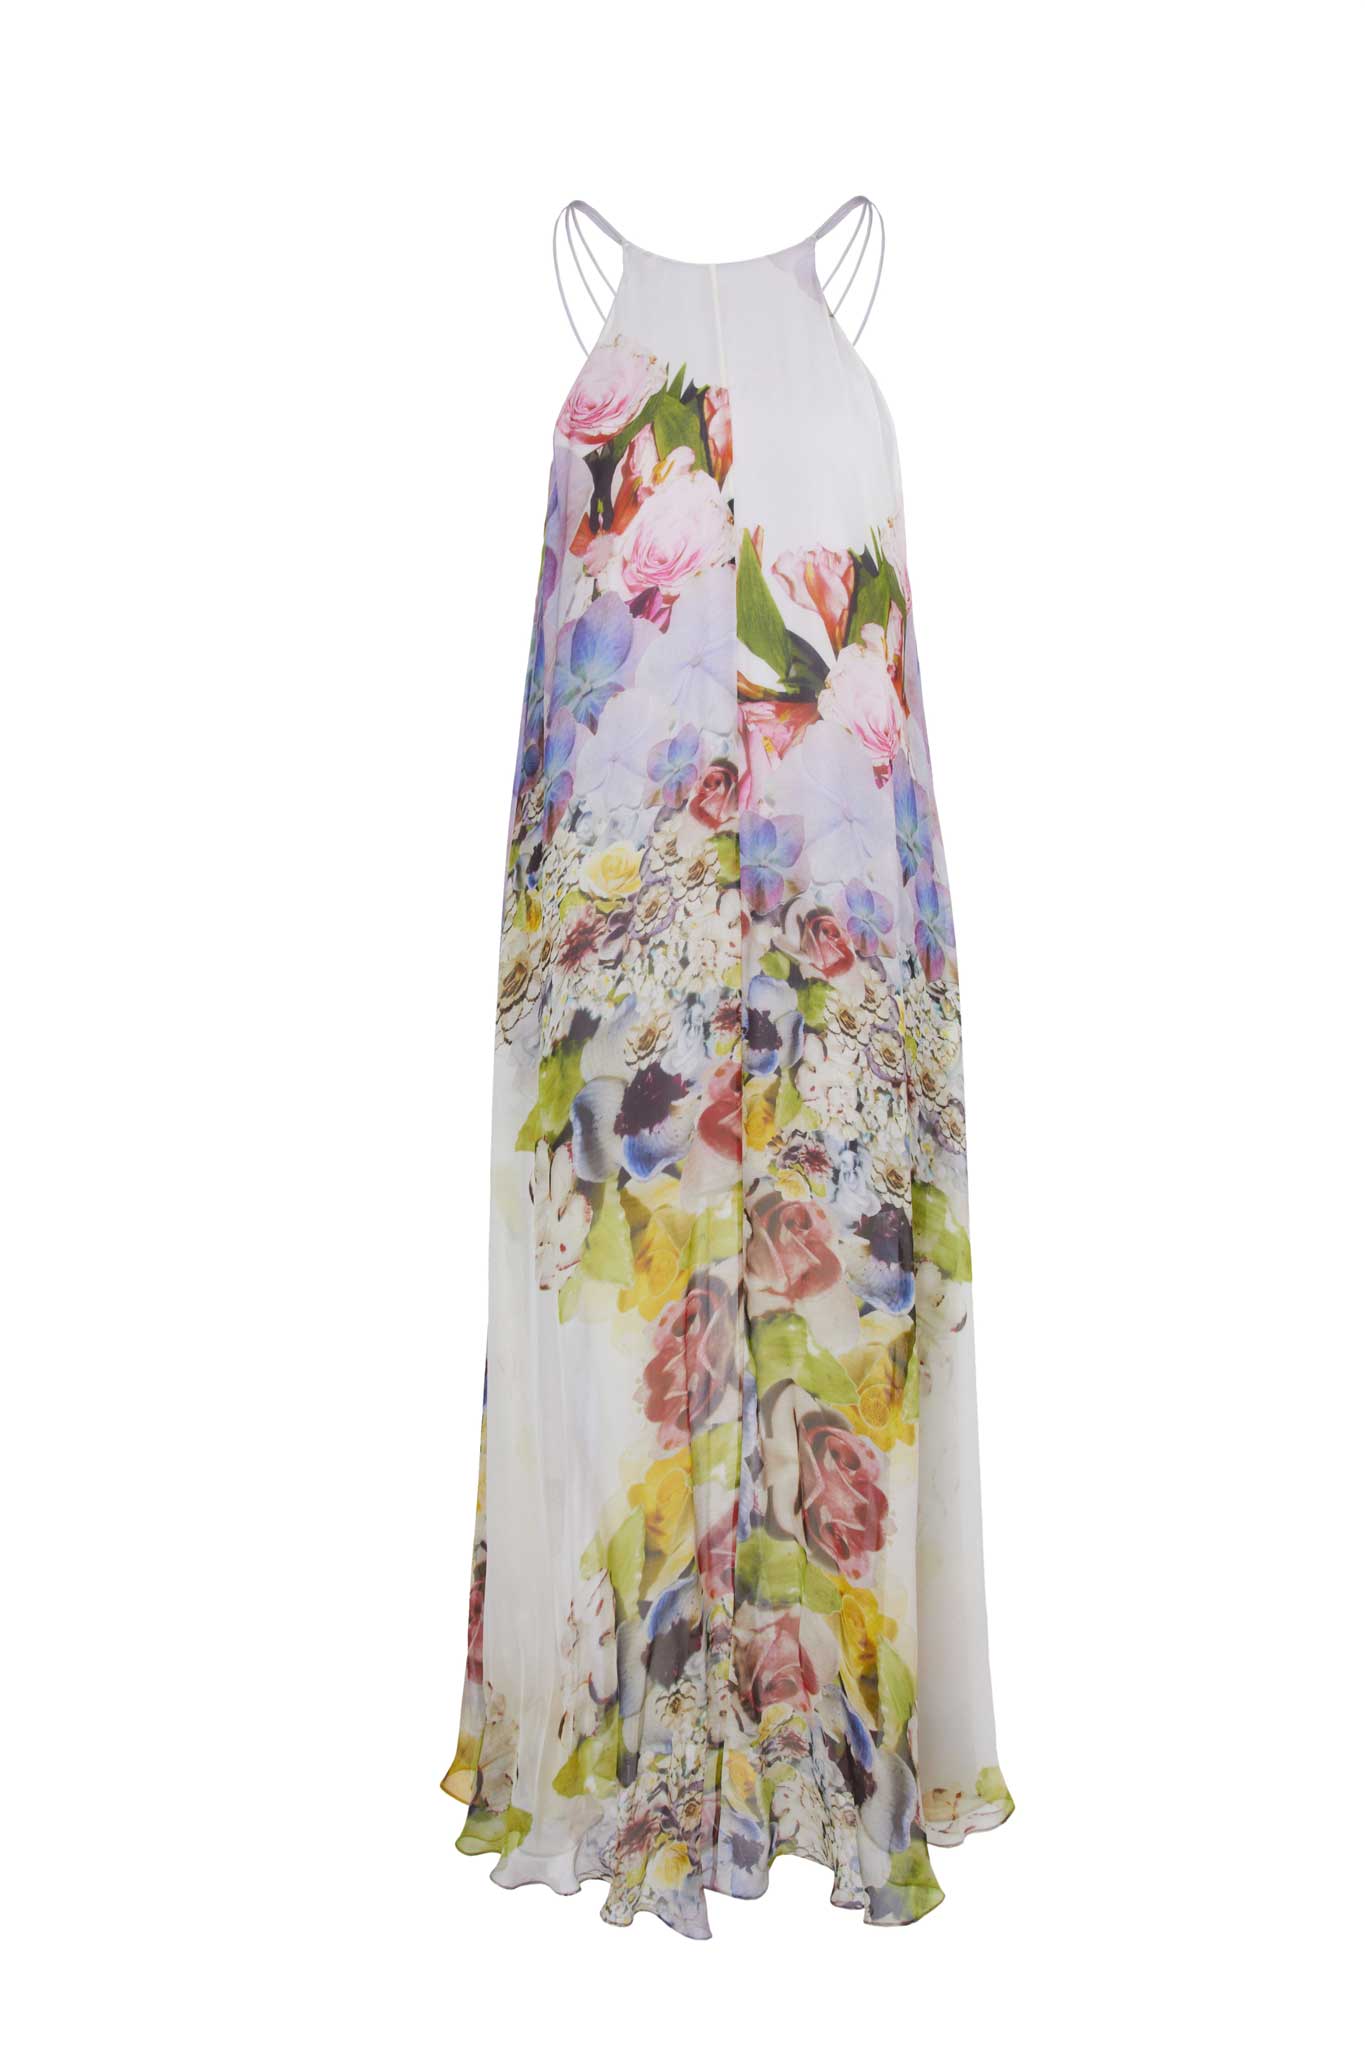 Try this floral chiffon number from Asos' Salon range for beach weddings and posh barbecues, £100, asos.com